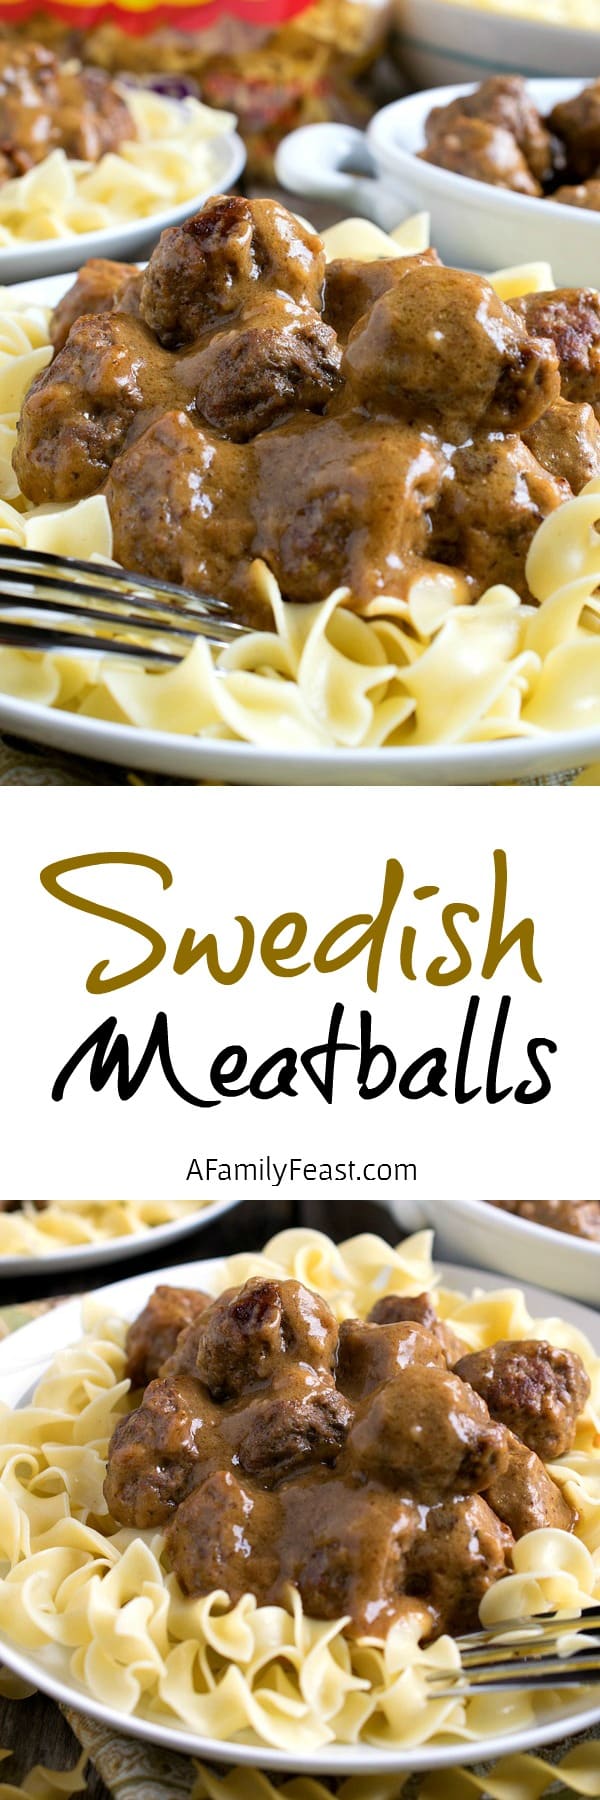 Swedish Meatballs over Noodles - Ultimate comfort food that is easy to make and delicious! 